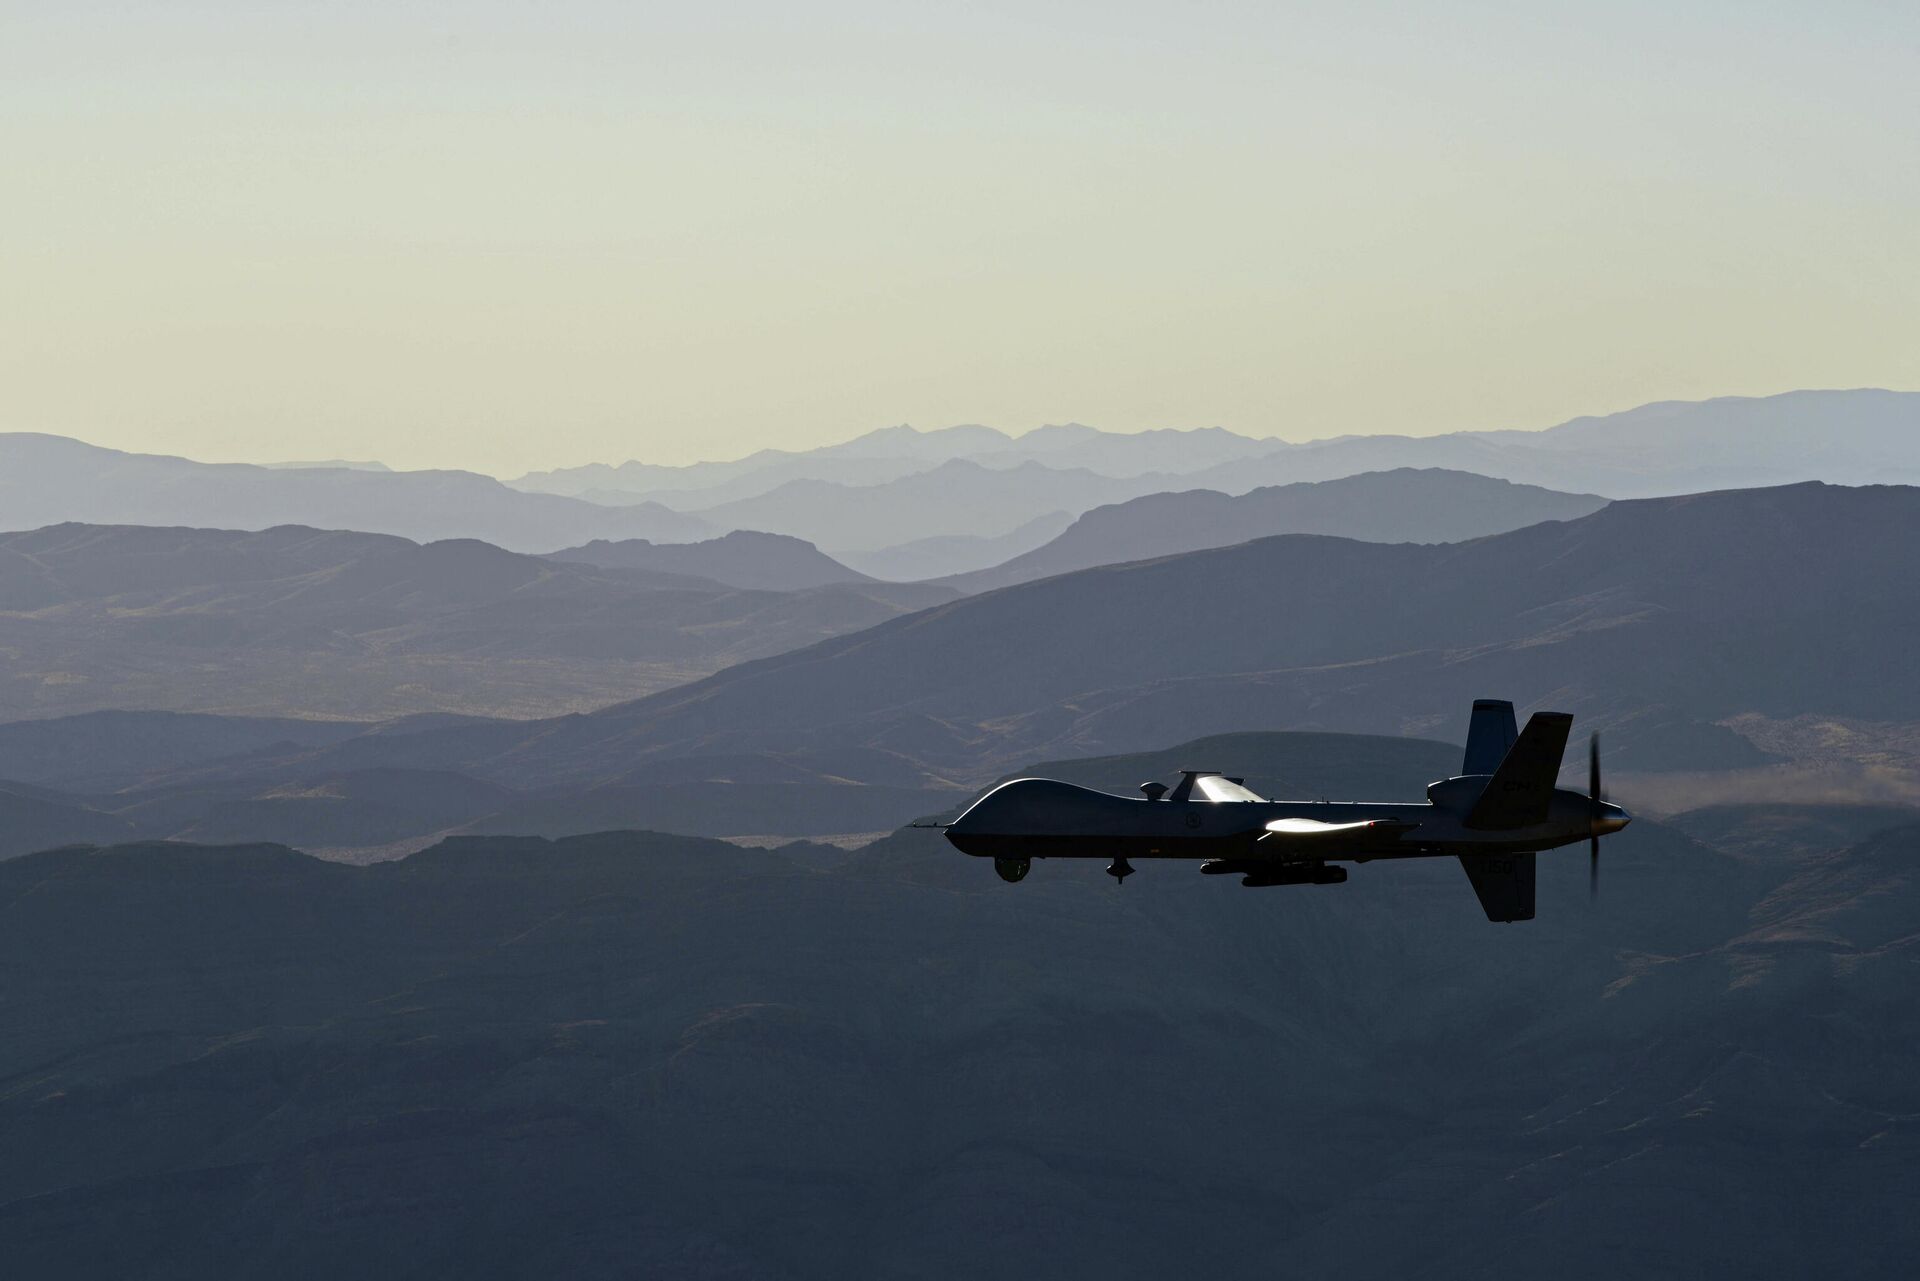 This handout photo courtesy of the US Air Force obtained on November 7, 2020 shows an armed MQ-9 Reaper unmanned aerial vehicle (UAV or drone) as it flies over the Nevada Test and Training Range on July 15, 2019. - Sputnik International, 1920, 18.09.2021